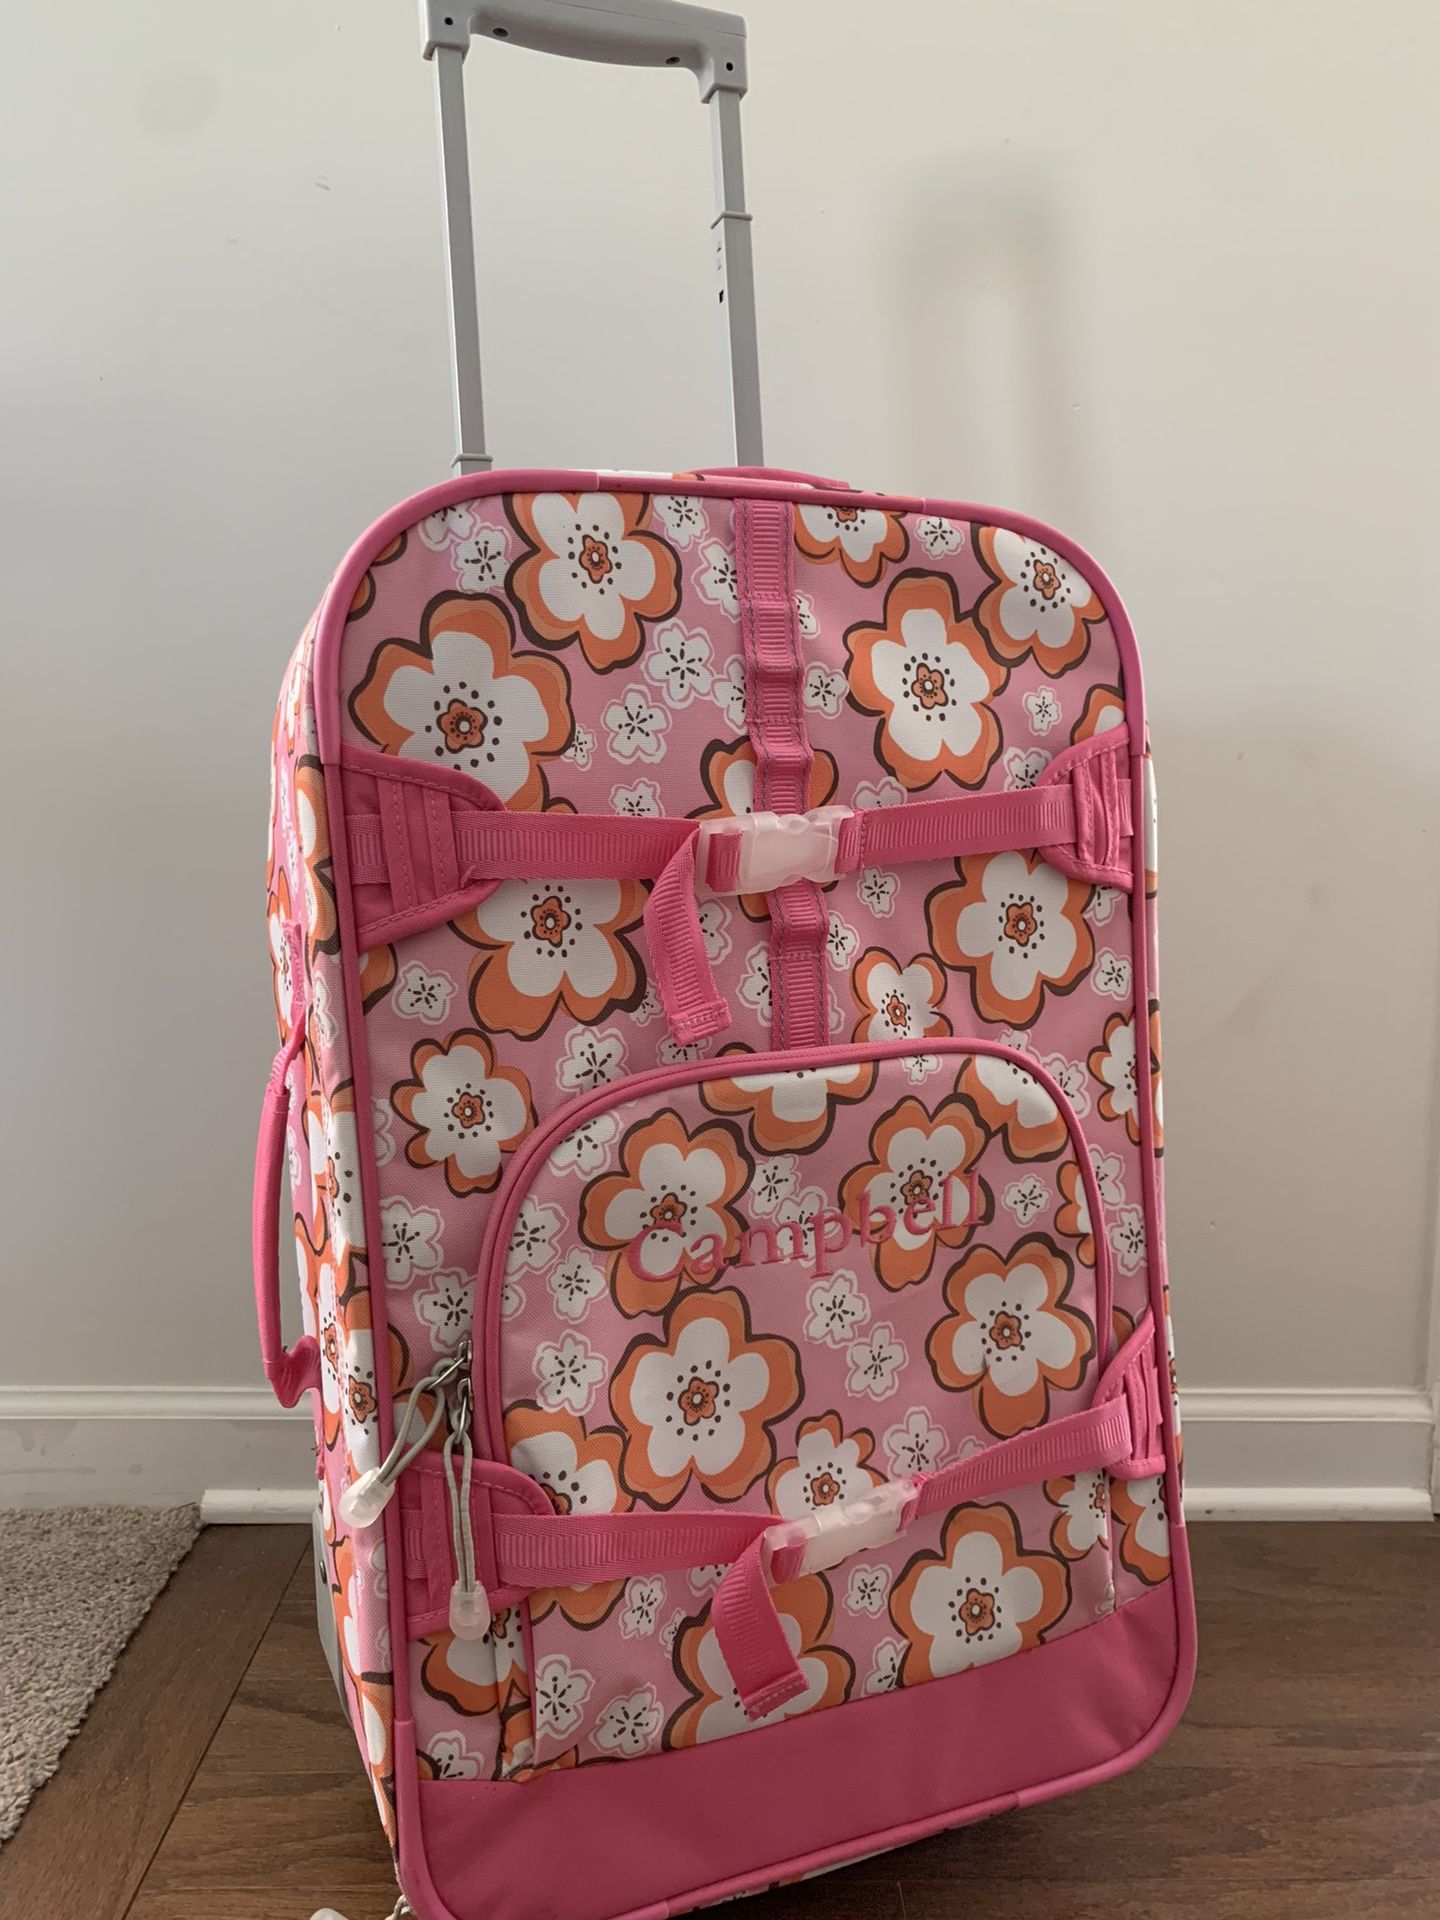 Pottery Barn Large Monogrammed Soft Rolling Luggage suitcase carry-on